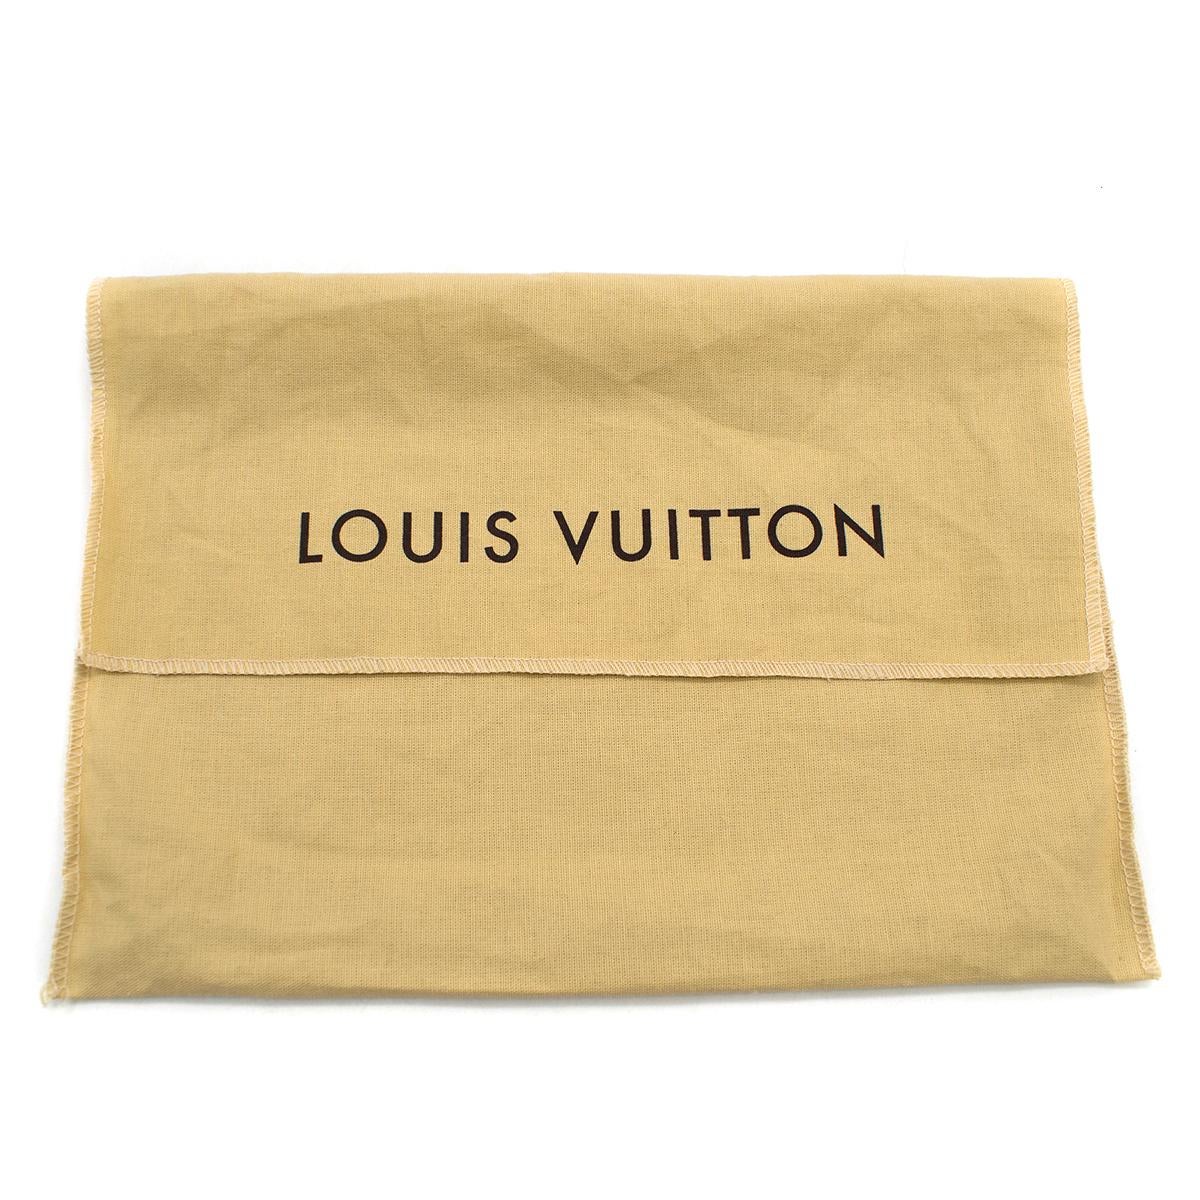 Louis Vuitton Small Gold Limited Edition Monogram Bag 6